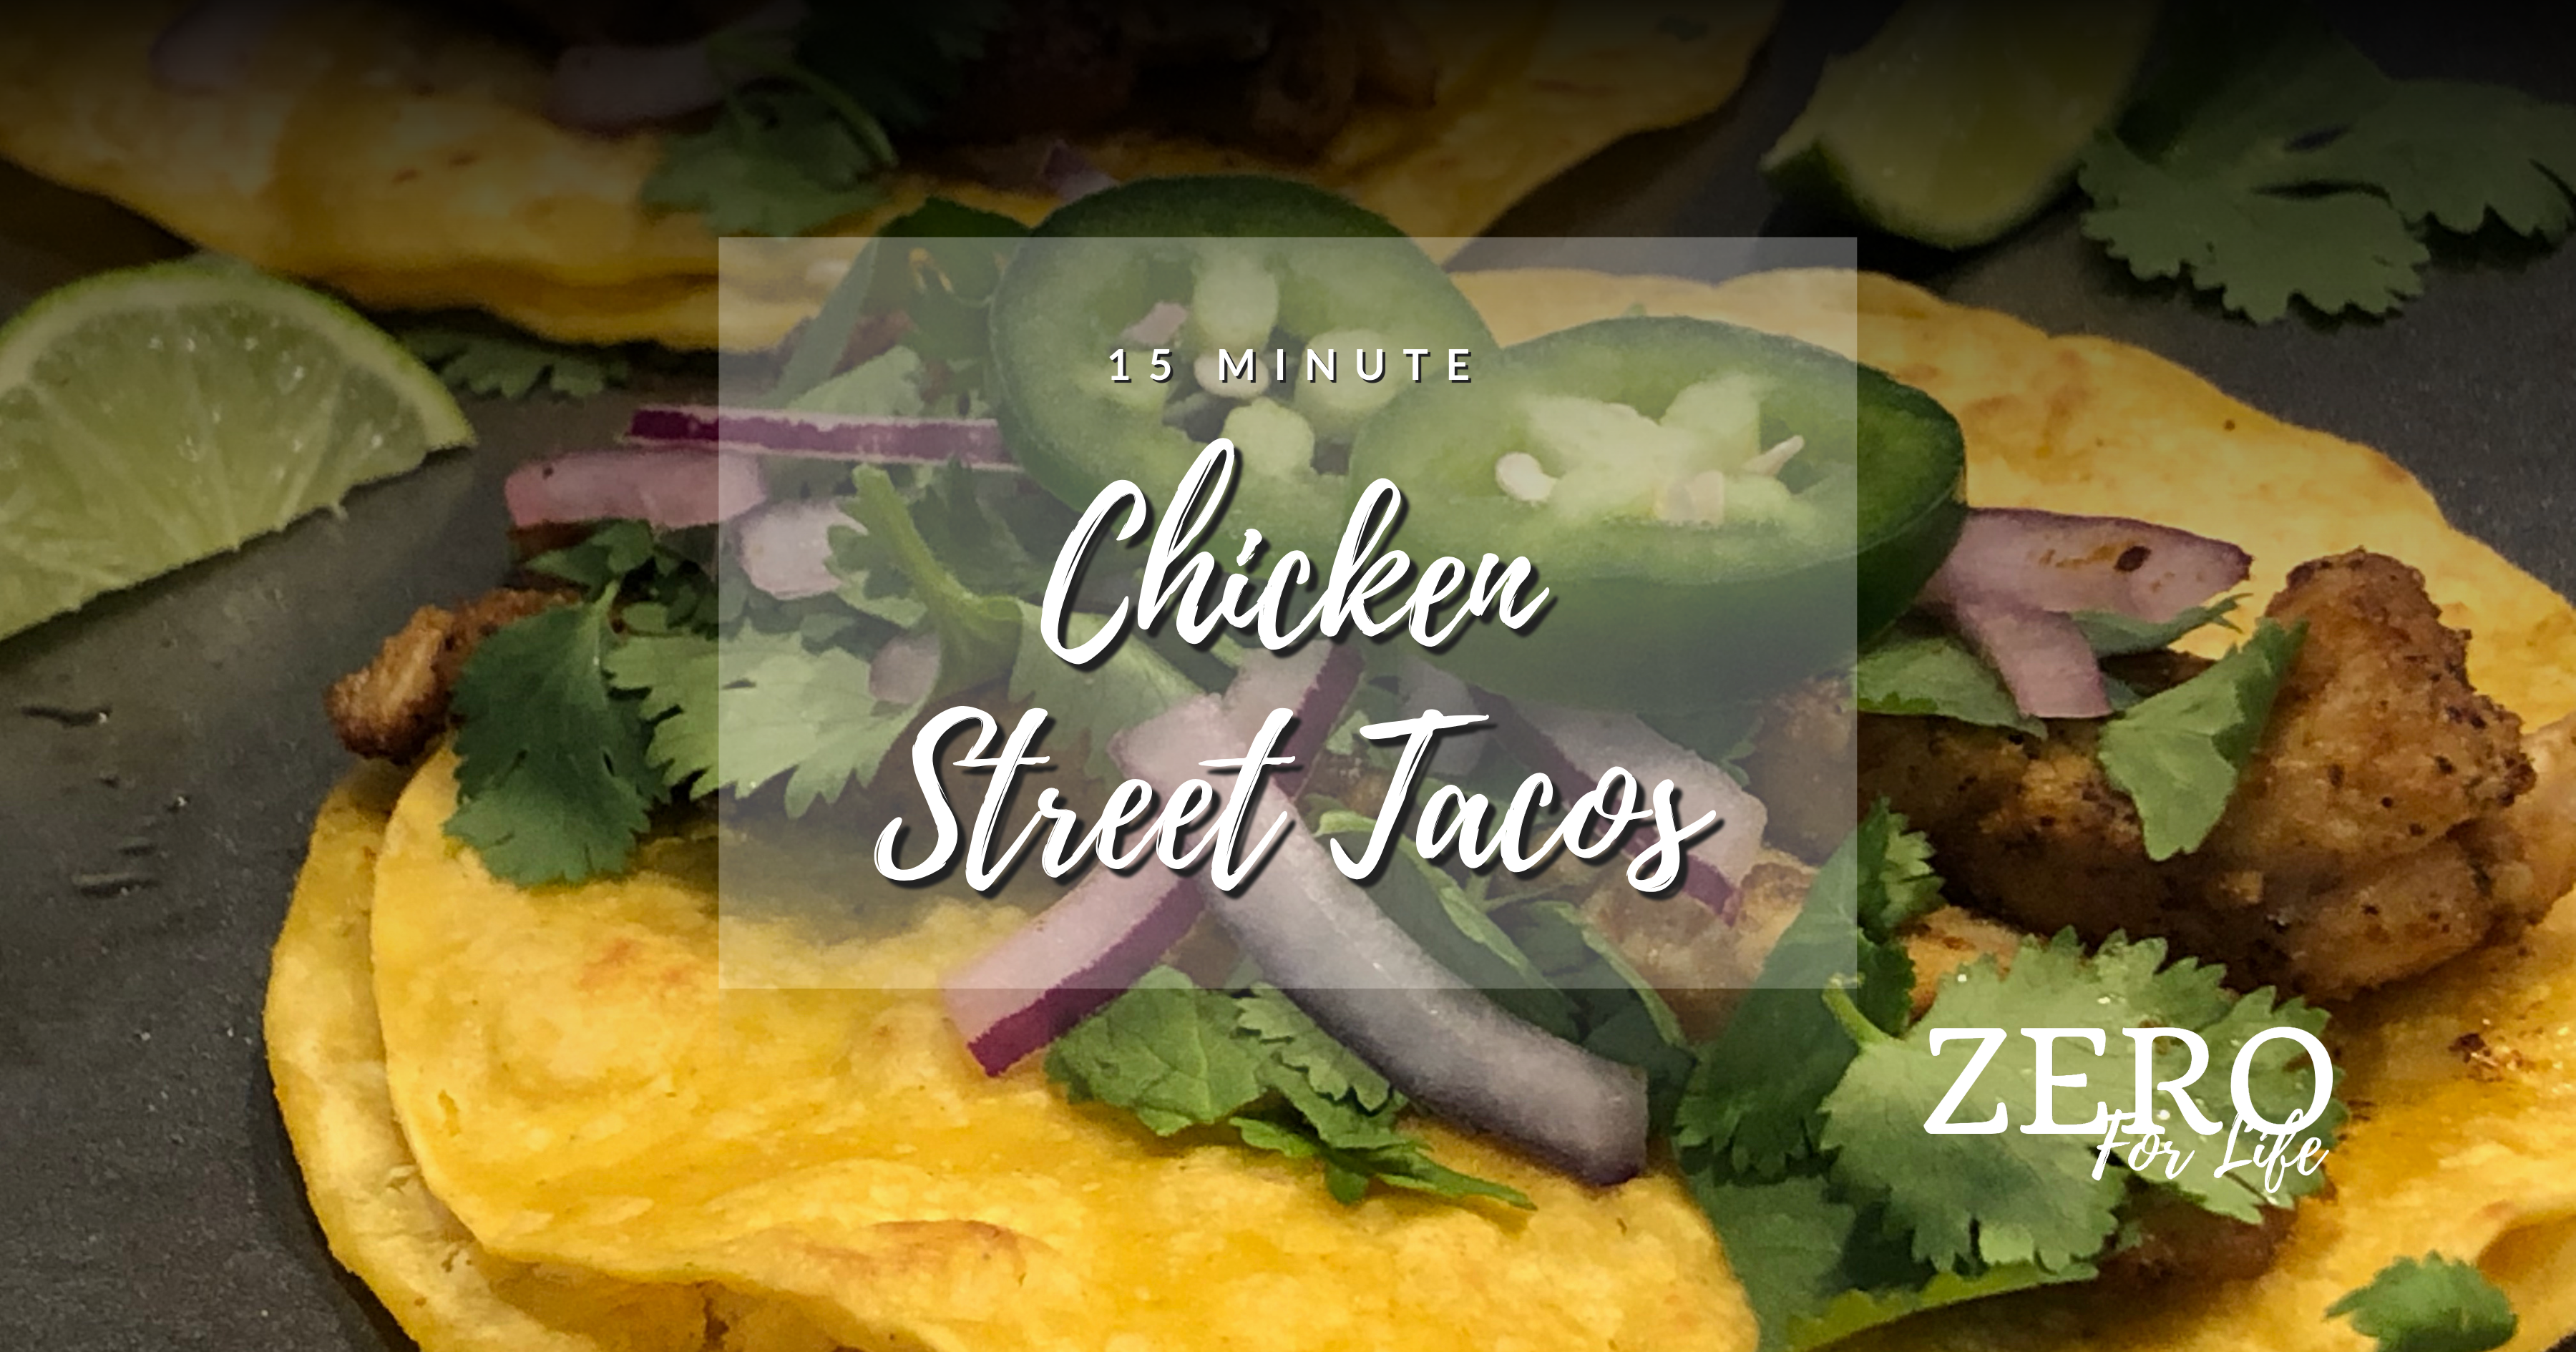 Image of 15 Minute Chicken Street Tacos with Zero For Life logo.